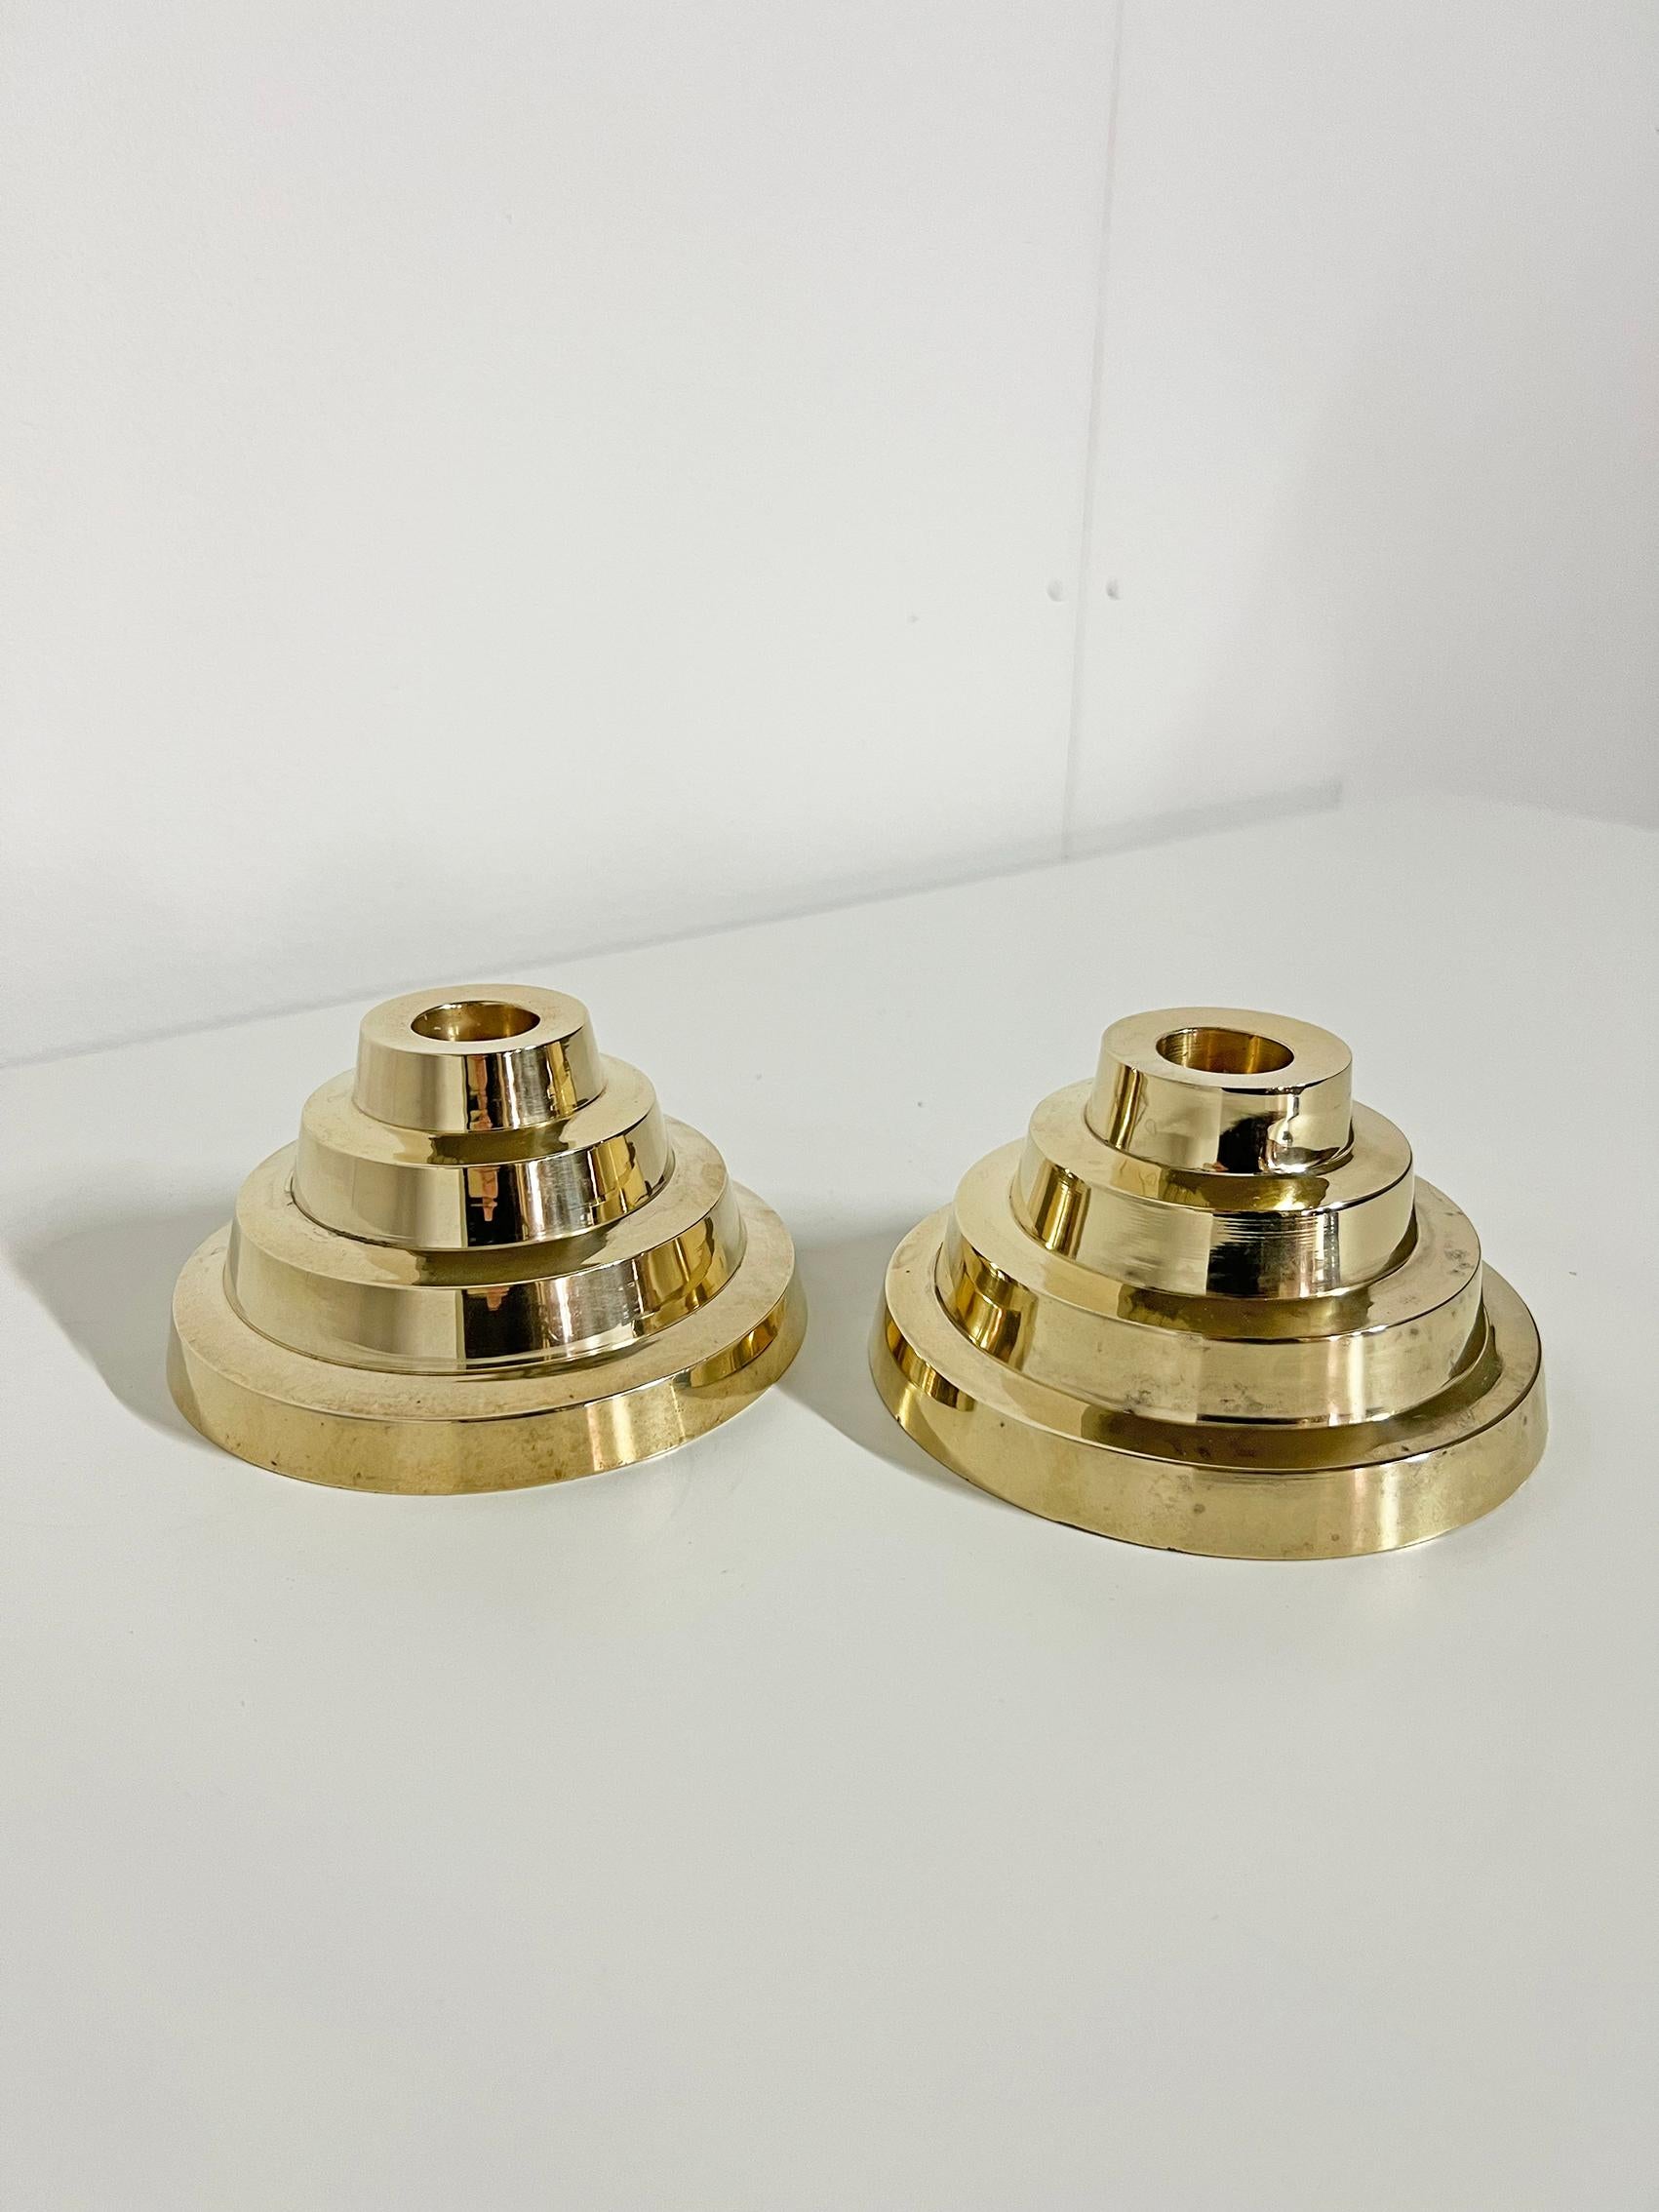 Very cool set of two candleholders in brass. 
Unknown designer, unknown producer. 
Good condition, wear and patina consistent with age and use.
Brass patina with some dark marks as seen on the last three pictures. 
